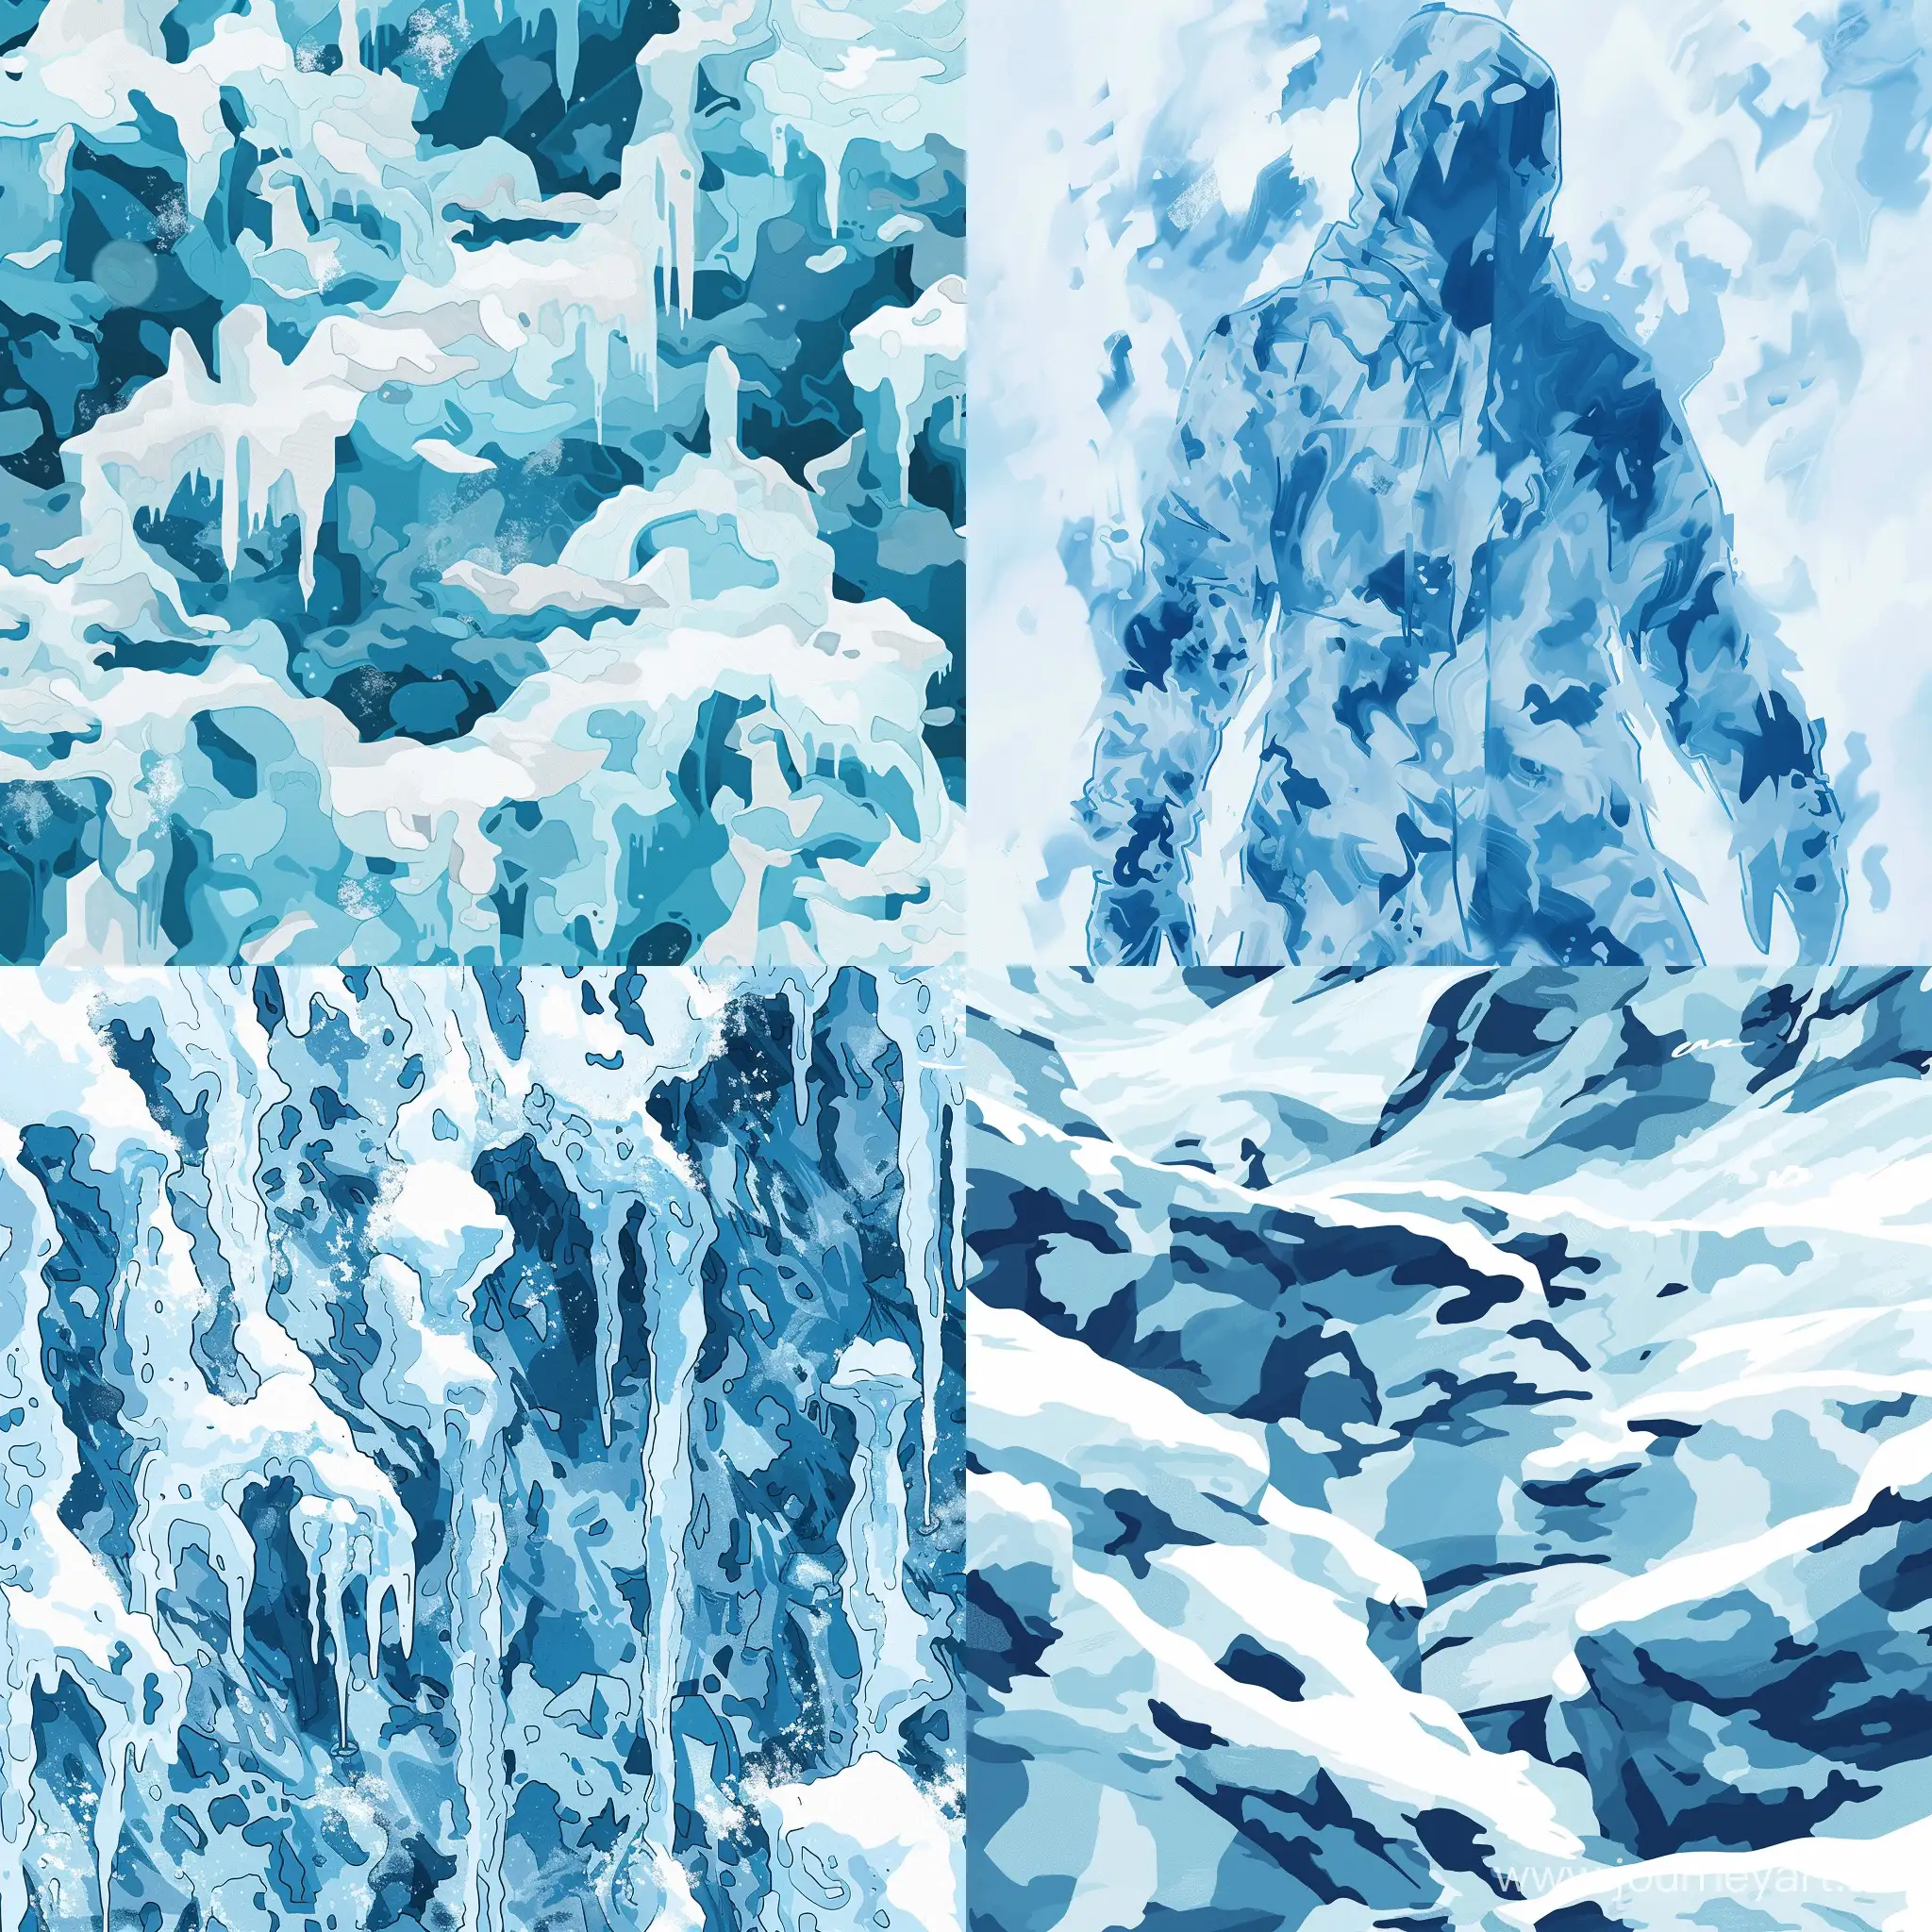 Generate an icy/cold camouflage illustration that blends seamlessly with wintry environments. Incorporate a frosty color palette dominated by shades of blue and white, and use abstract patterns and shapes that mimic the textures of ice and snow. The camouflage should evoke a sense of stealth and adaptation to frozen landscapes, providing effective concealment in cold environments.